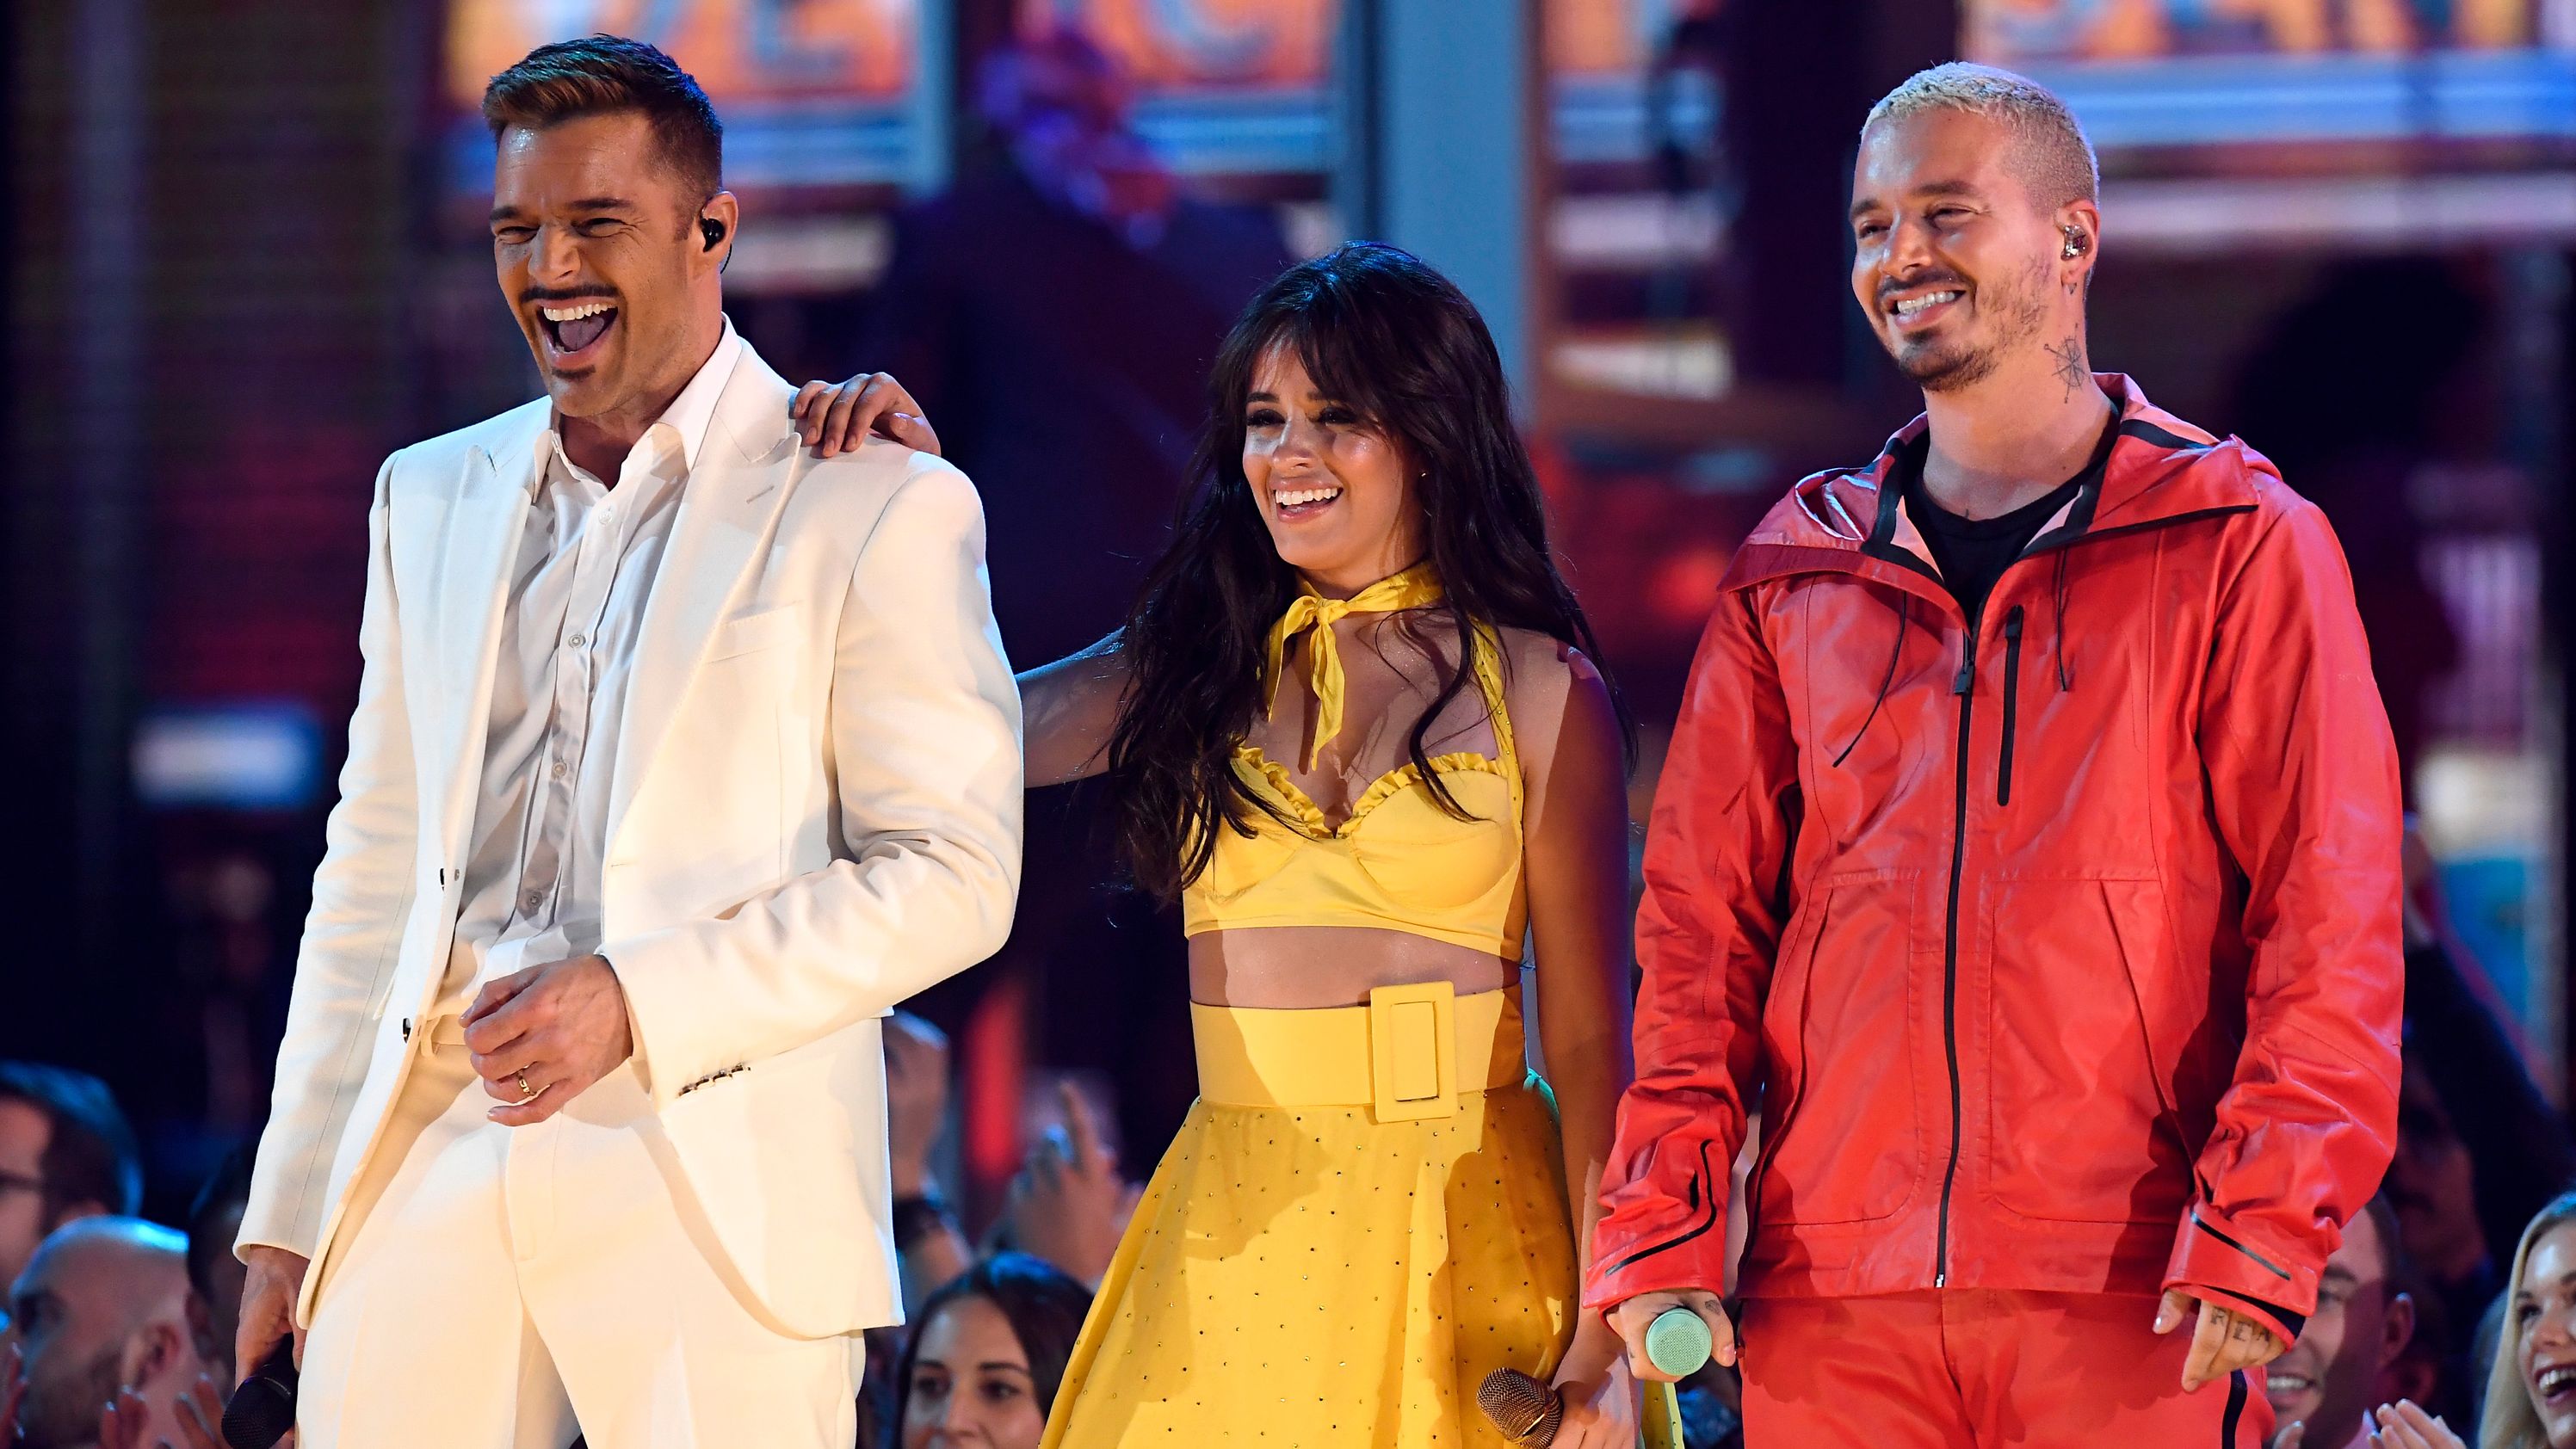 Ricky Martin, Camila Cabello and J Balvin onstage at the Grammy Awards in 2019.